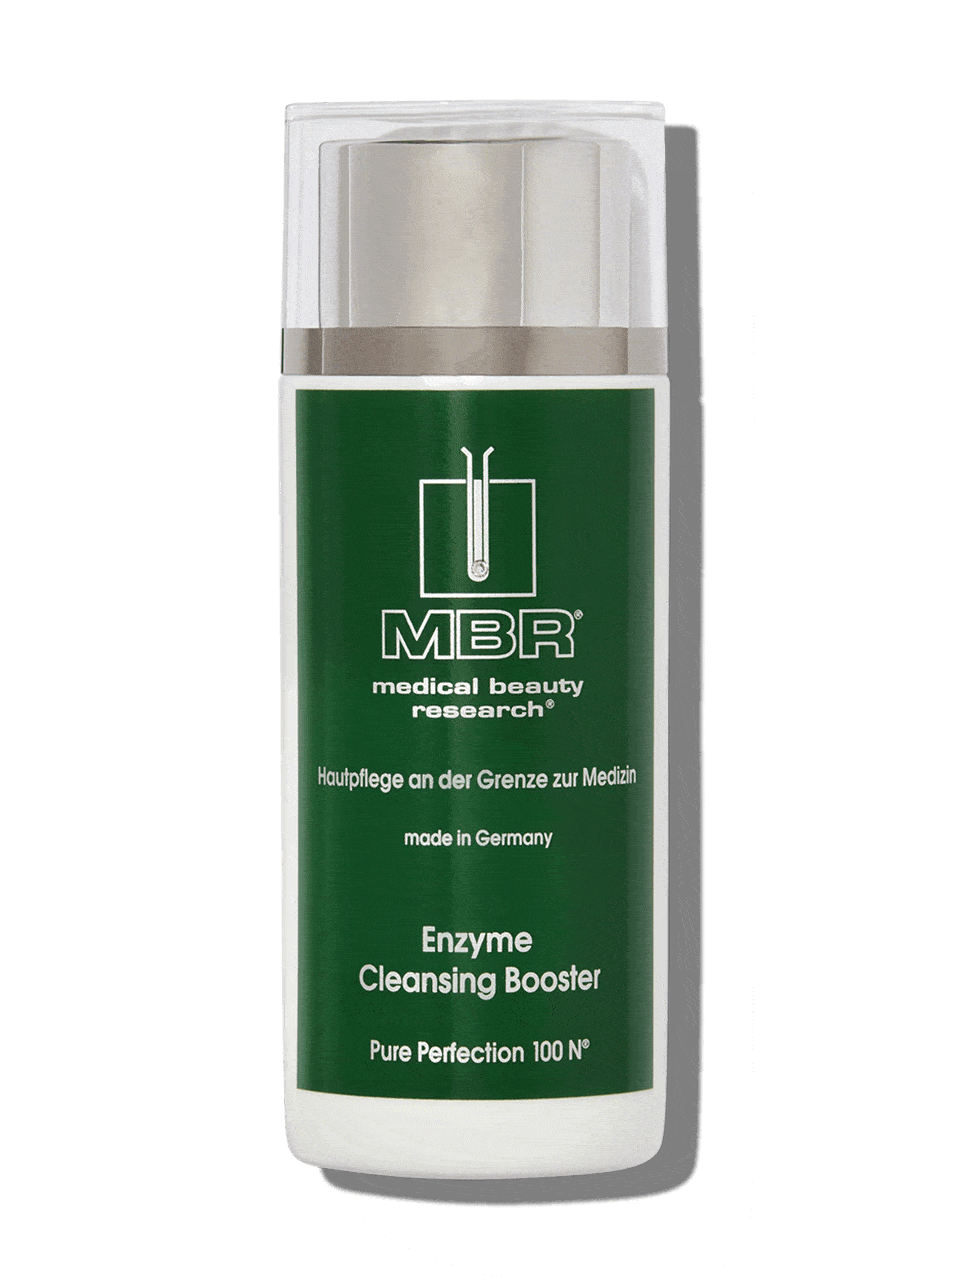 MBR Medical Beauty Research + Enzyme Cleansing Booster